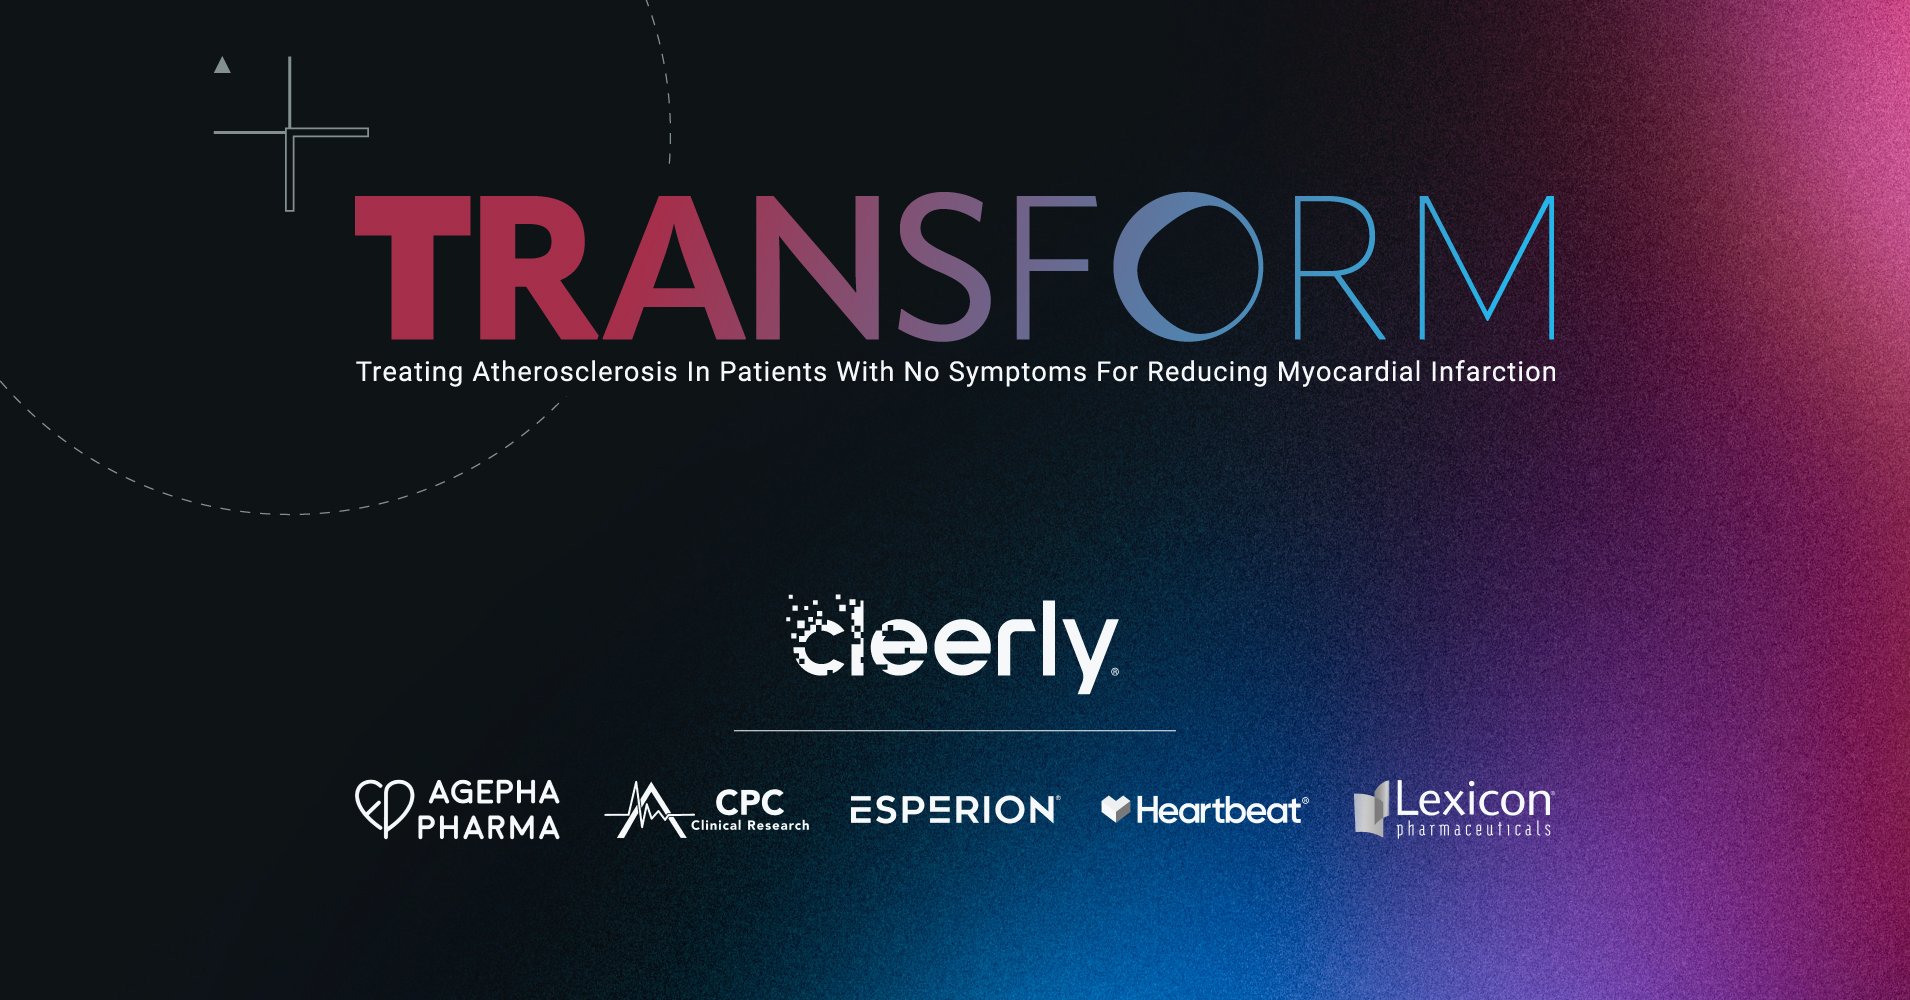 The TRANSFORM trial is designed to test whether a personalized care approach based on CAD diagnosis and staging improves outcomes compared to current risk factor assessment and treatment.